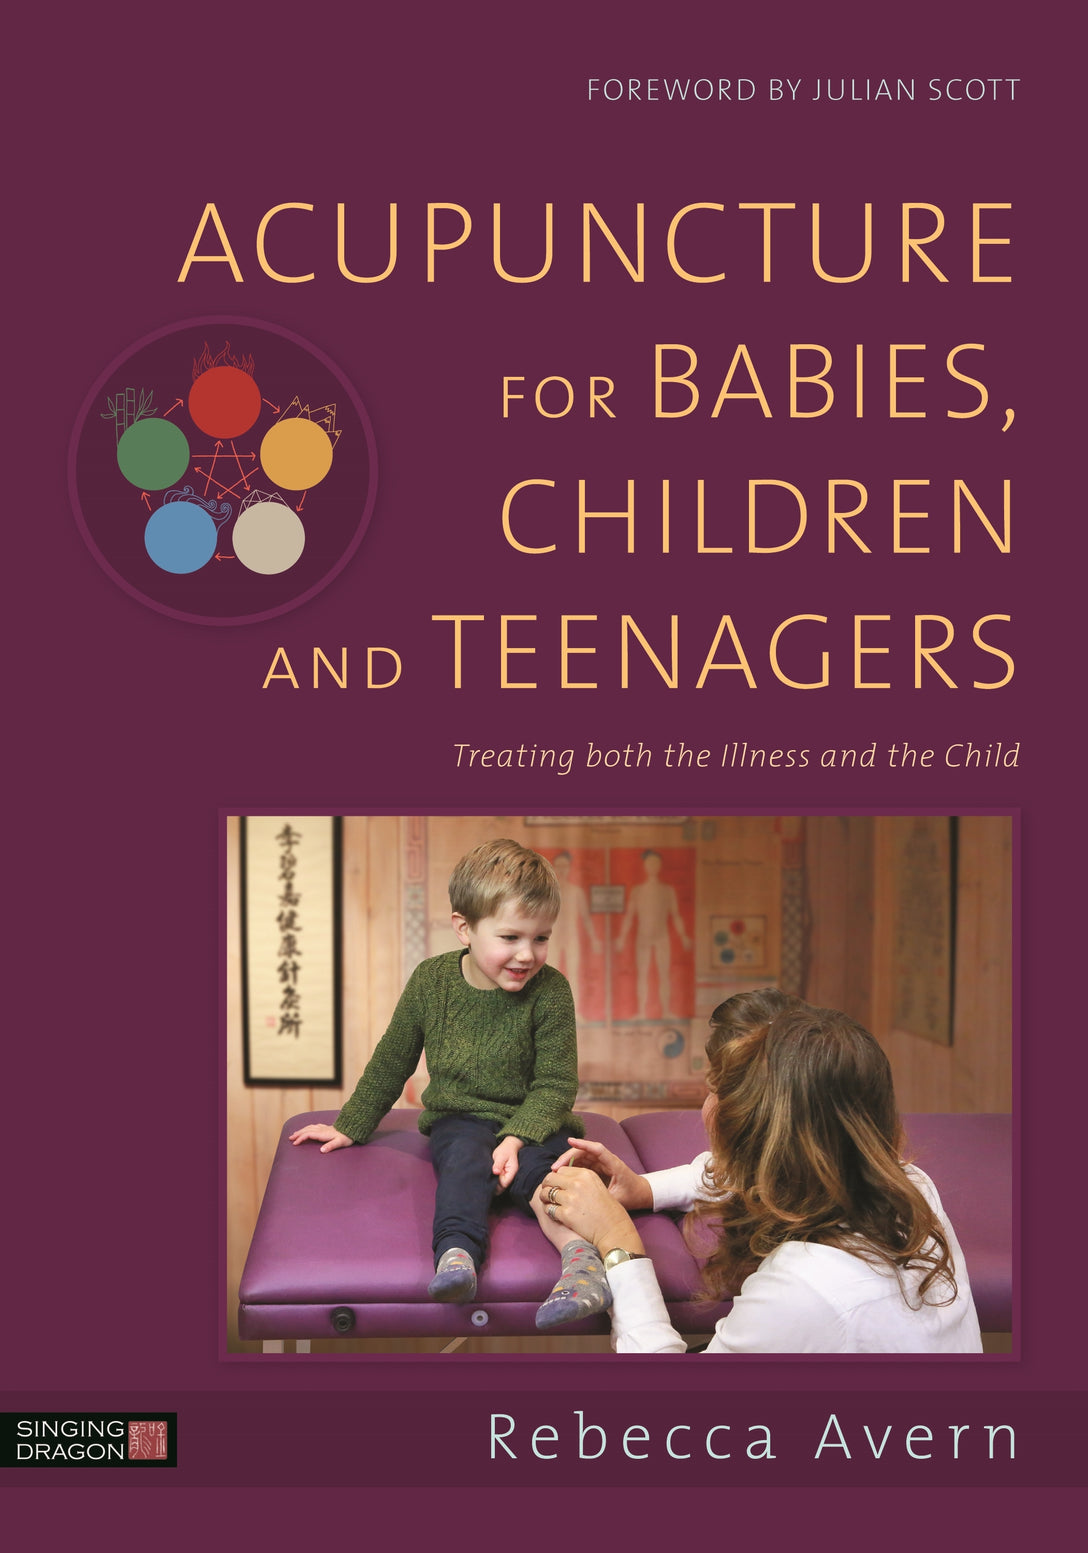 Acupuncture for Babies, Children and Teenagers by Sarah Hoyle, Rebecca Avern